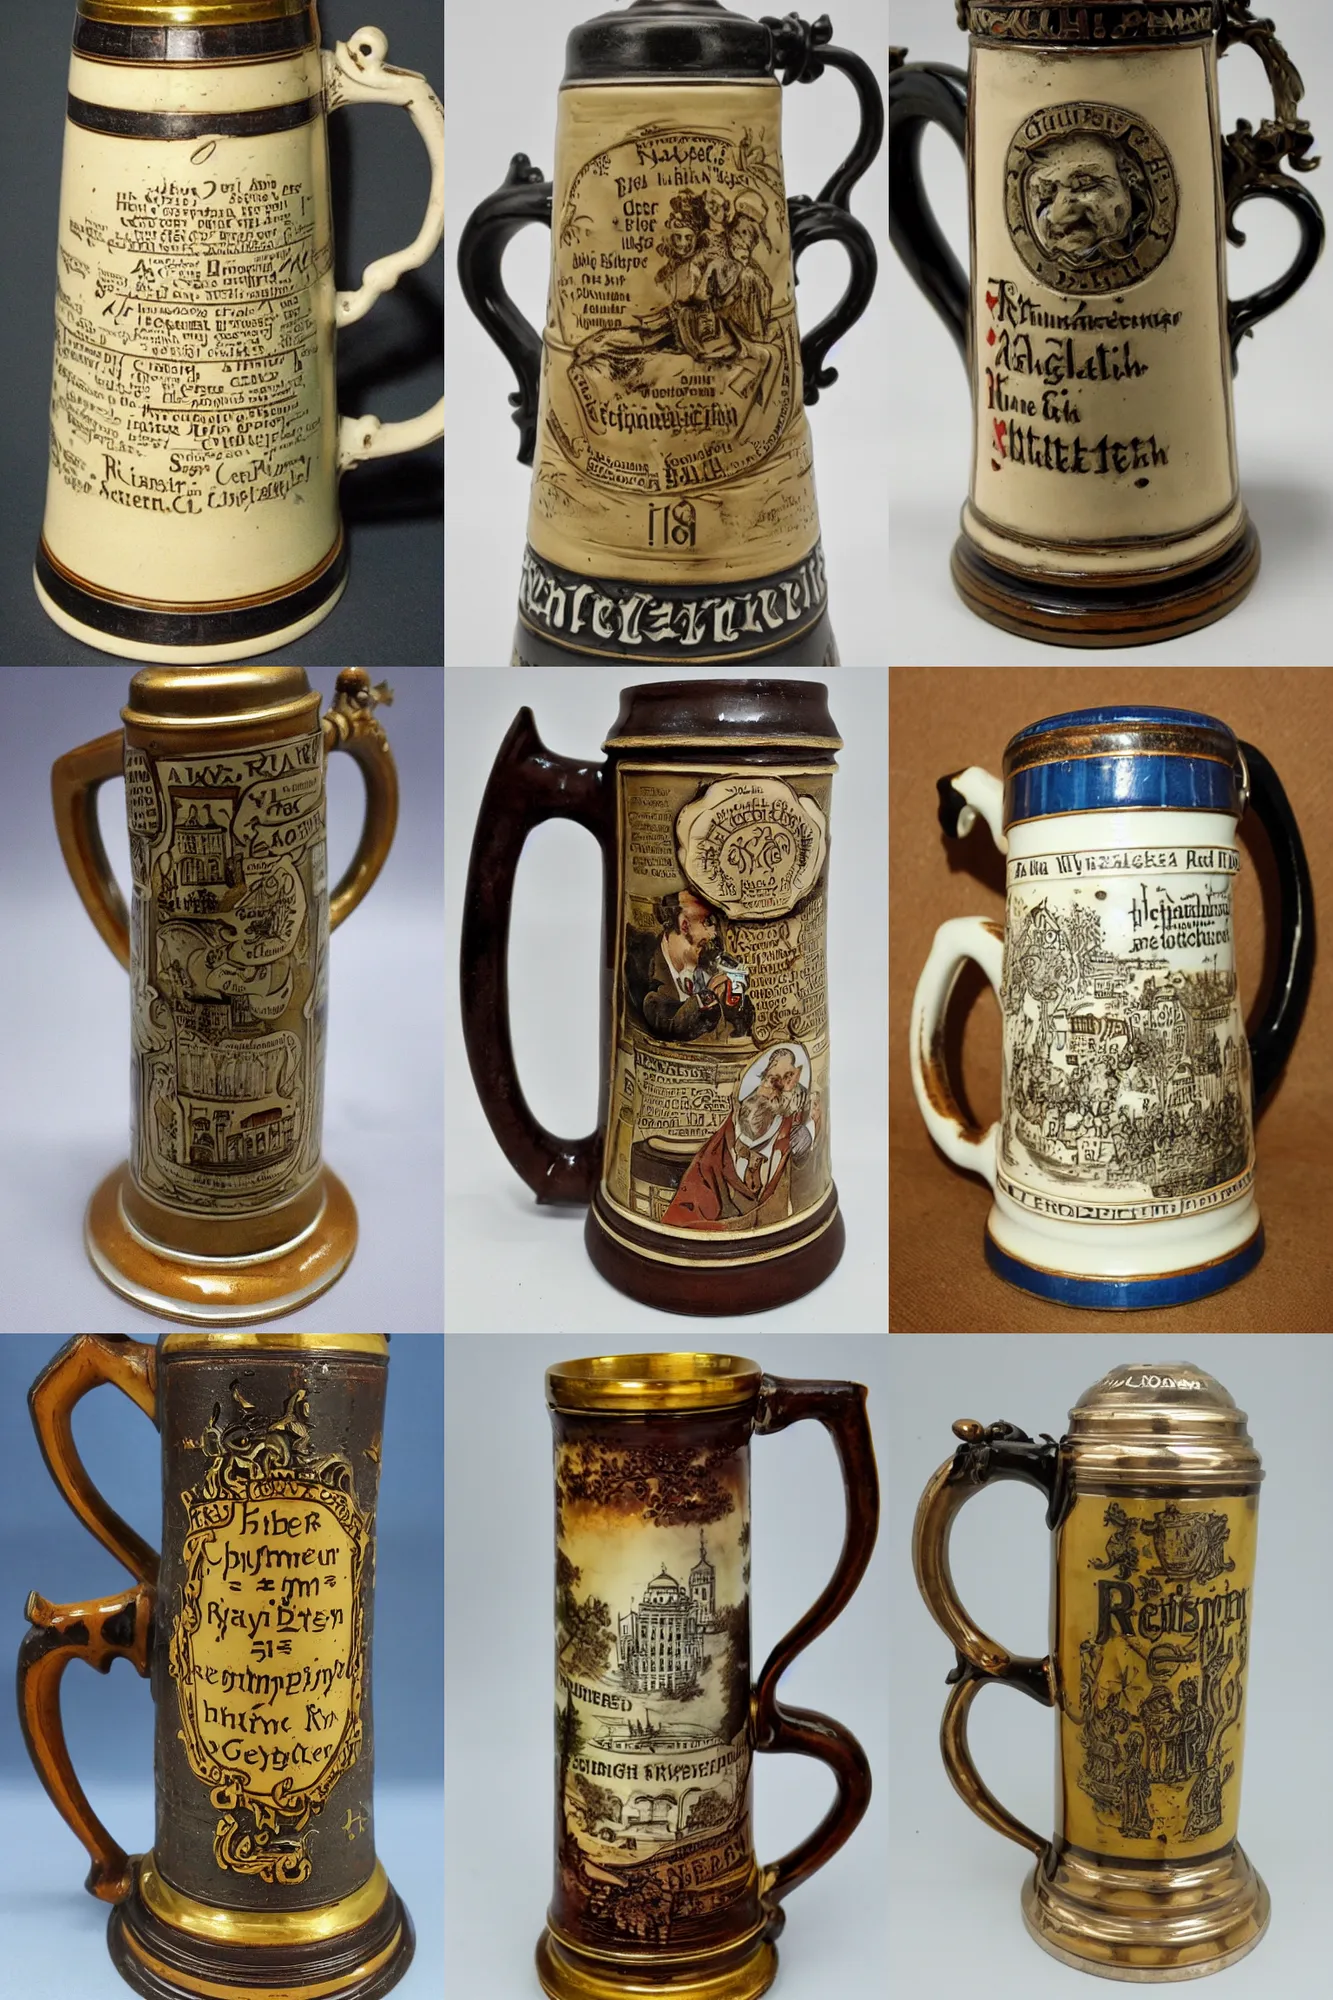 Prompt: A beer stein with rhyming German couplets on it, photograph from an antique store